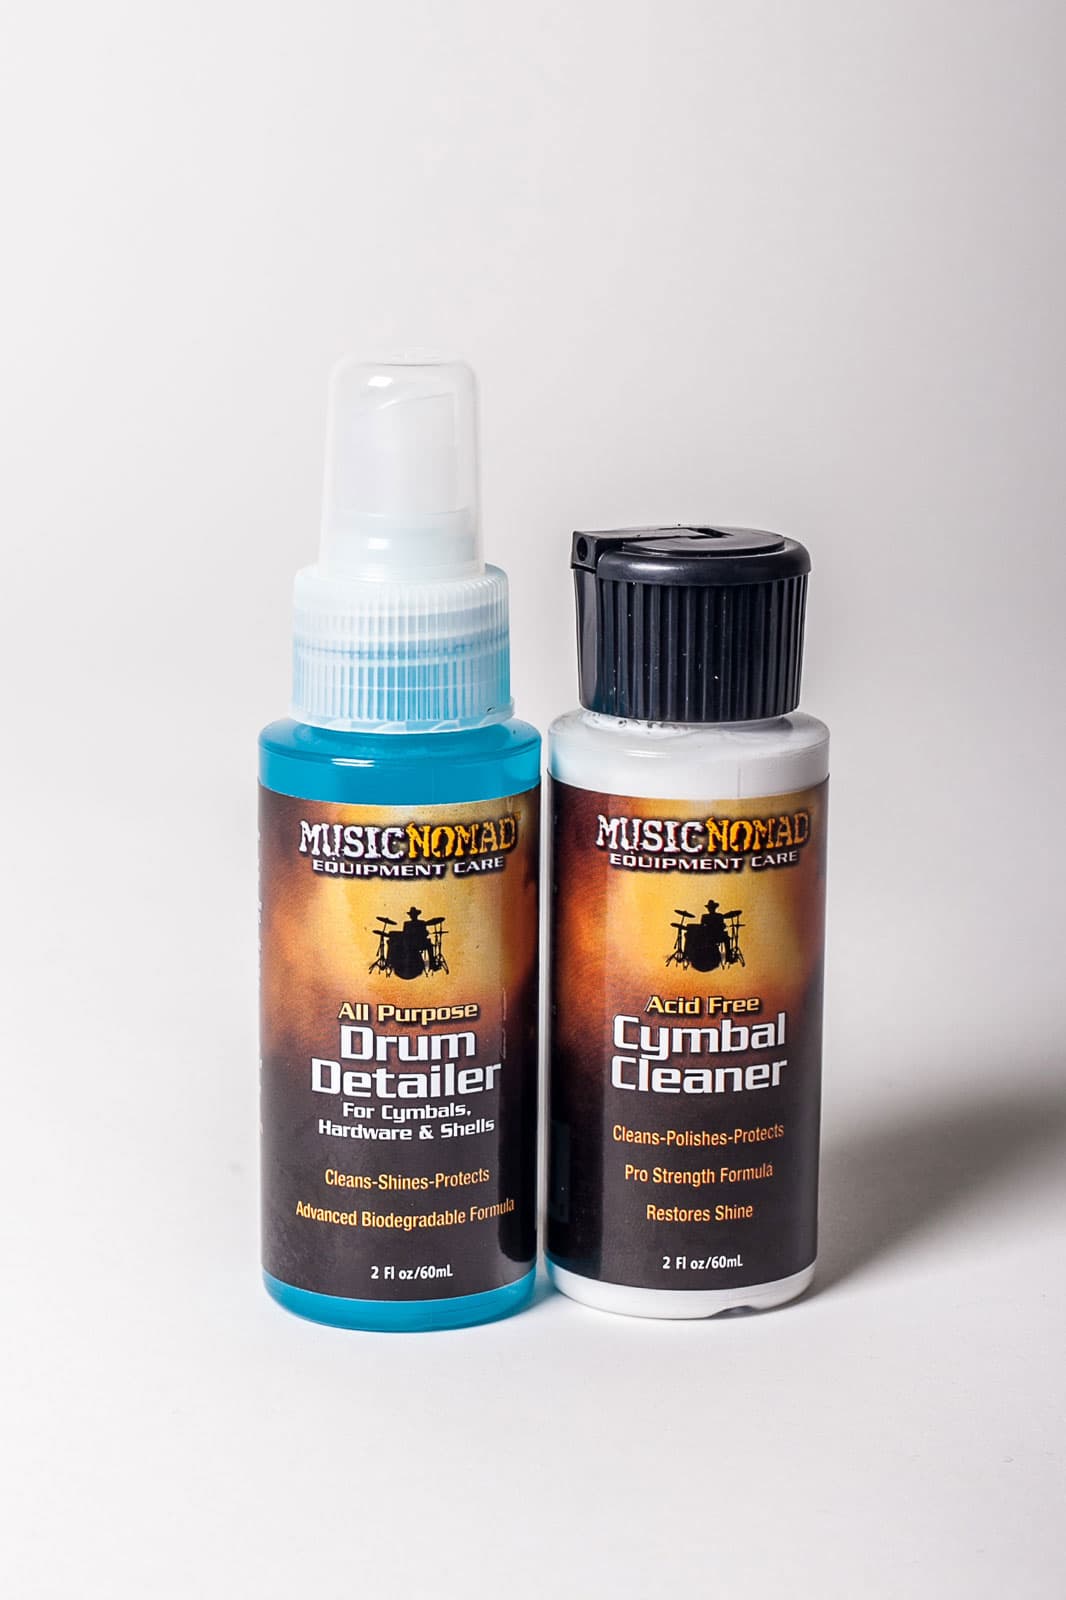 Musicnomad Mn117 Drum Detailer and Cymbal Cleaner